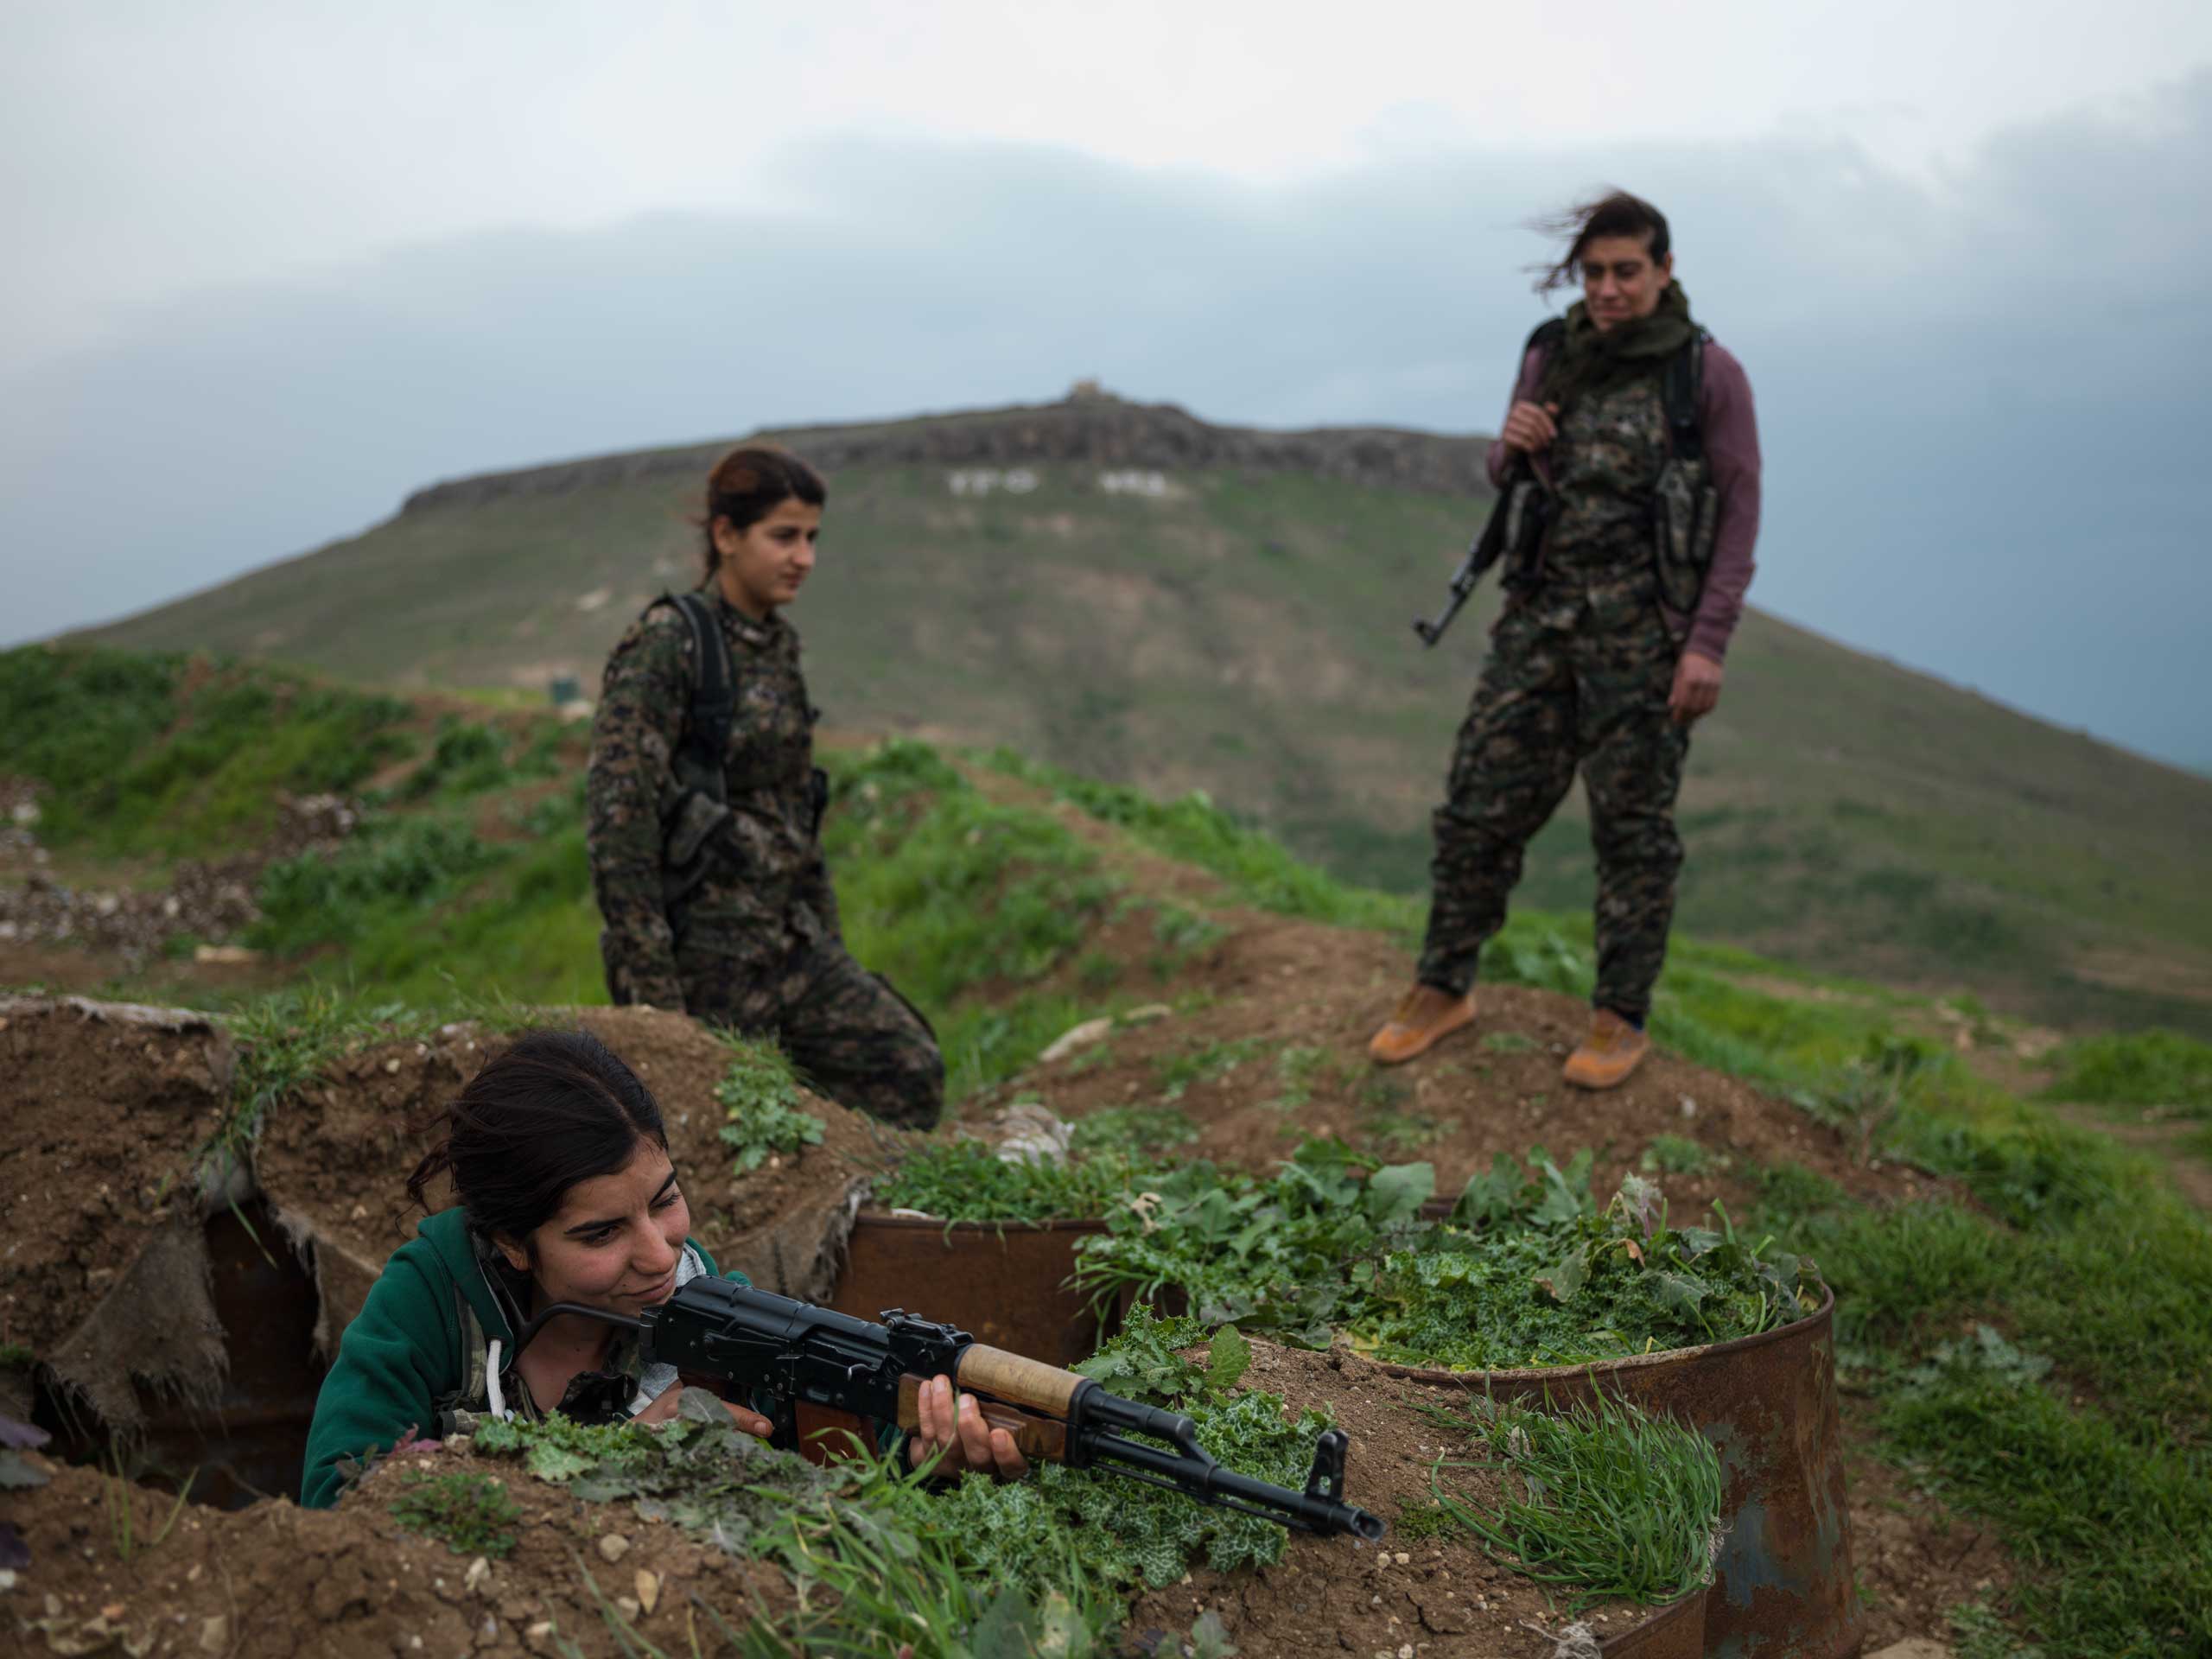 YPJ fighters on their base at the border between Syria and Iraq. Young female fighters are indoctrinated to the ideology of their charismatic leader, Abdullah Ocalan, head of the Kurdish Workers' Party (PKK), who promotes marxist thought and empowerment of women.